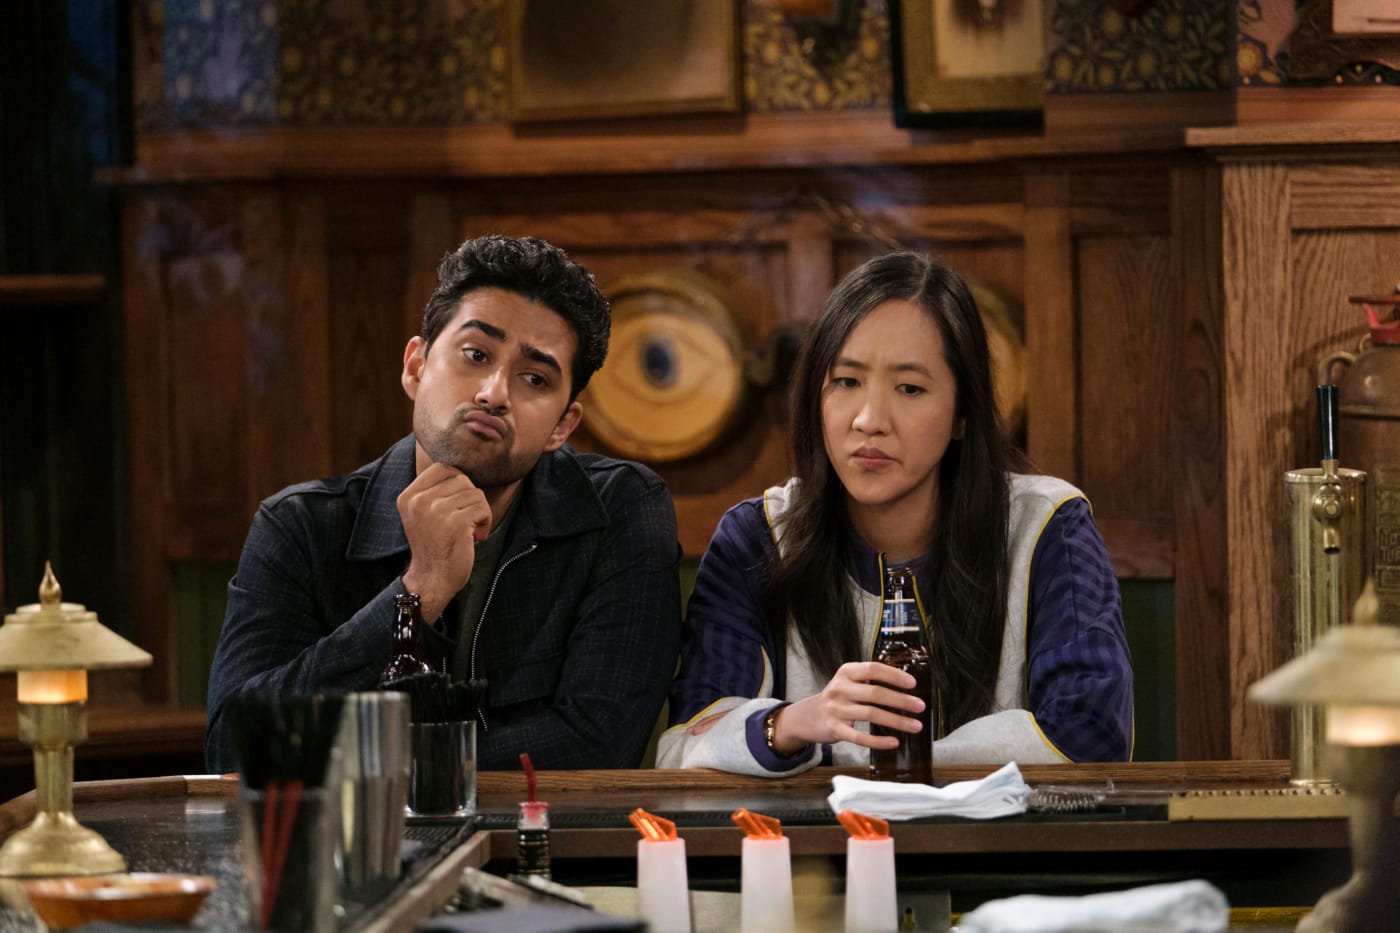 How I Met Your Father Season 1 Episode 8 Review: “The Perfect Shot” Goes for Broke In Exciting Fashion